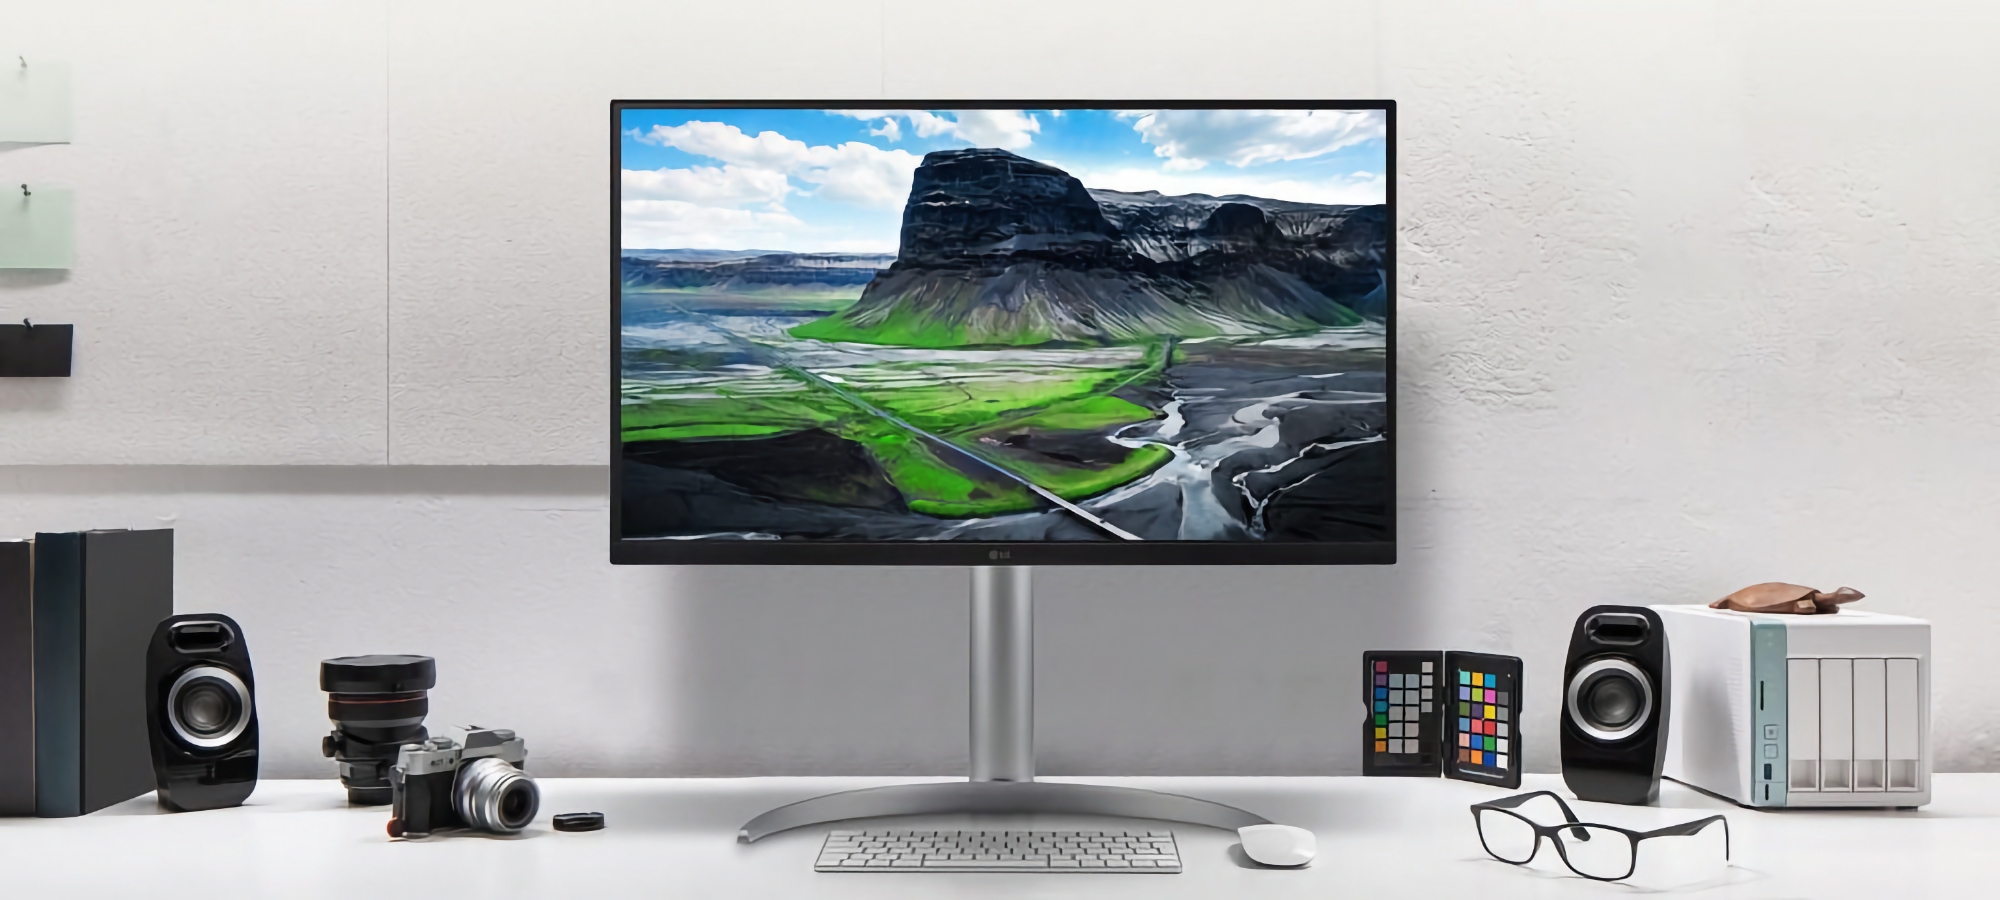 LG introduced 27UQ850V: 27-inch monitor with IPS Black matrix and 4K resolution